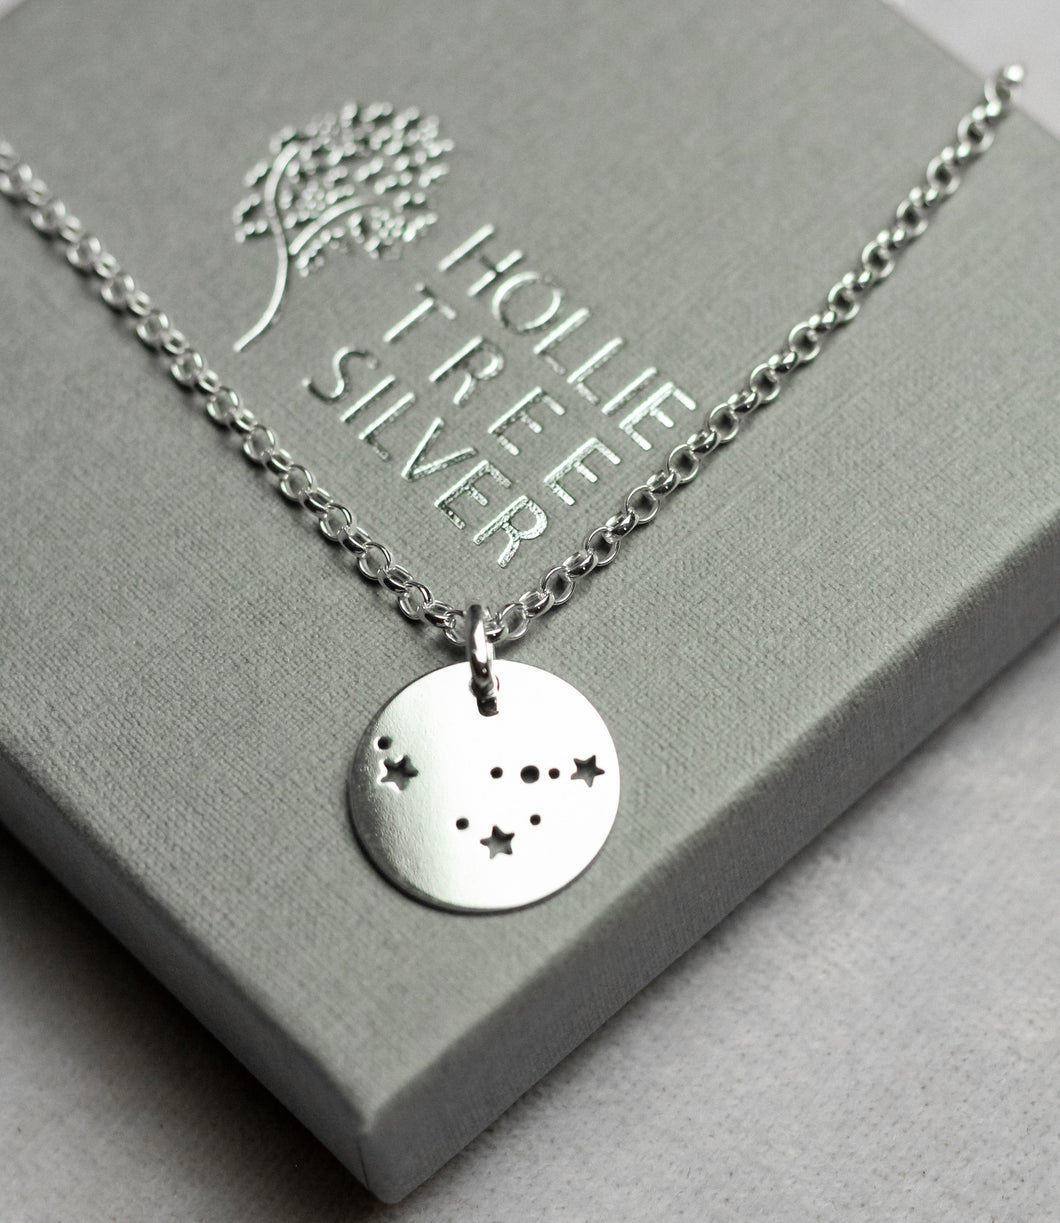 Capricorn Star Sign Constellation necklace in Sterling Silver